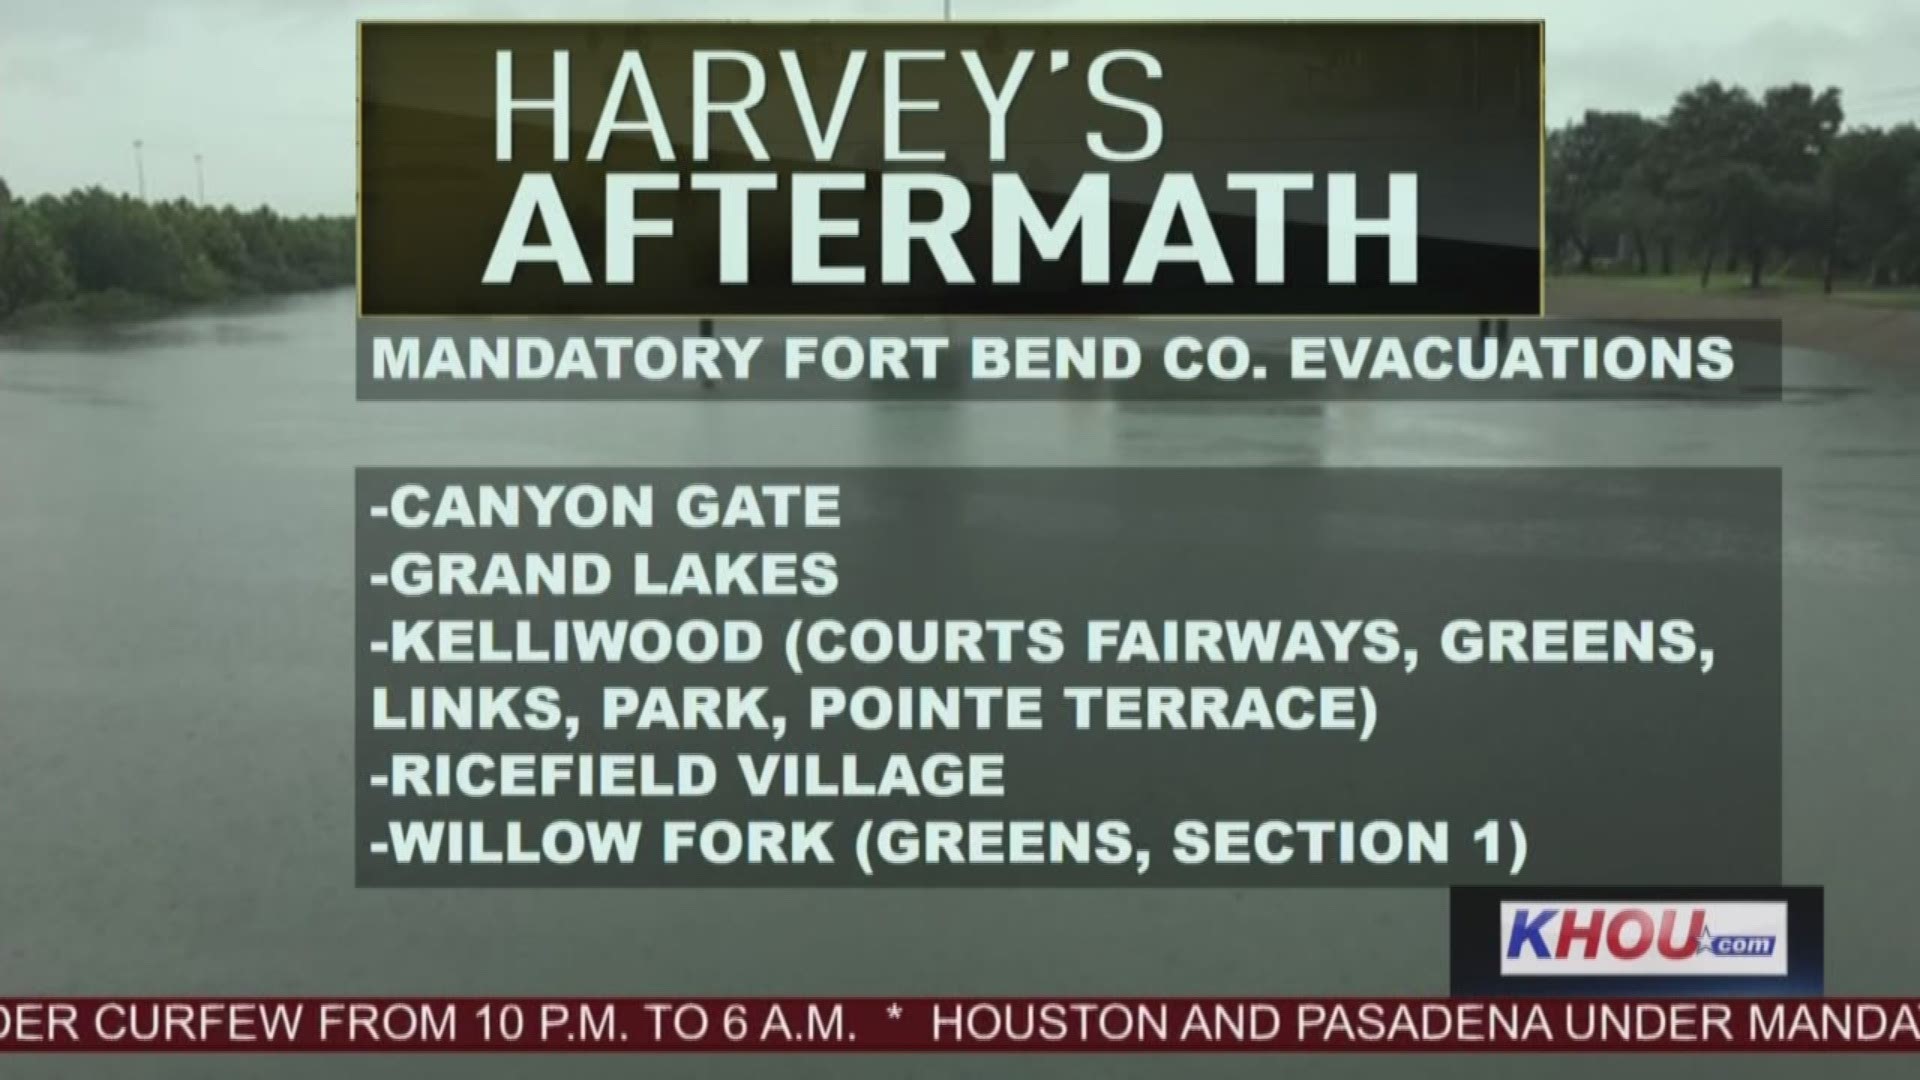 Alan Spears with the Fort Bend County Office of Emergency Management discusses the mandatory evacuations issued for subdivisions near the Barker Reservoir.